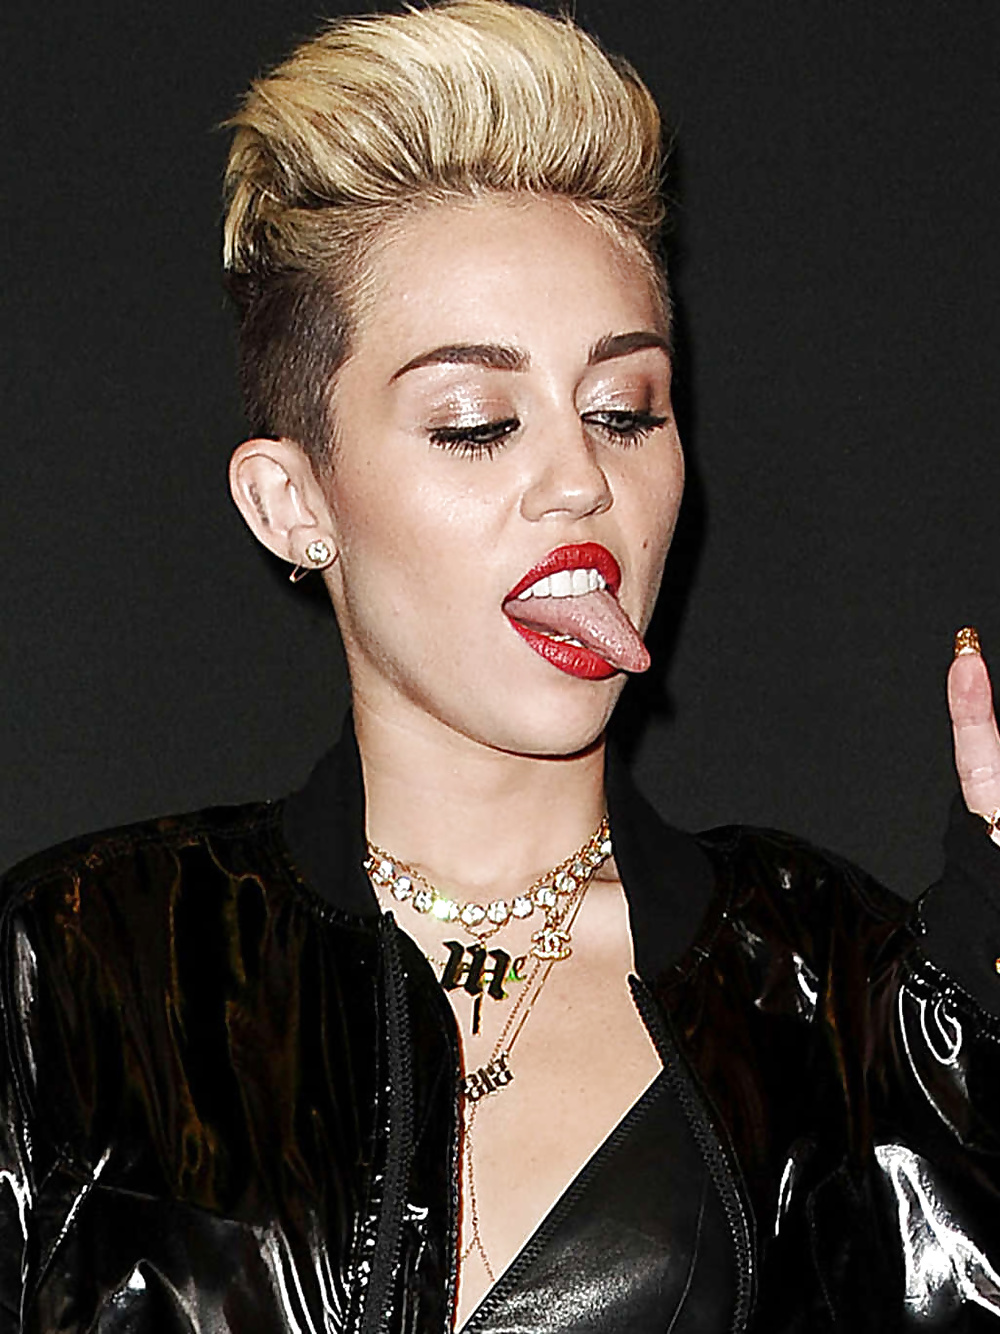 Best Miley Cyrus pics to wank #24652943